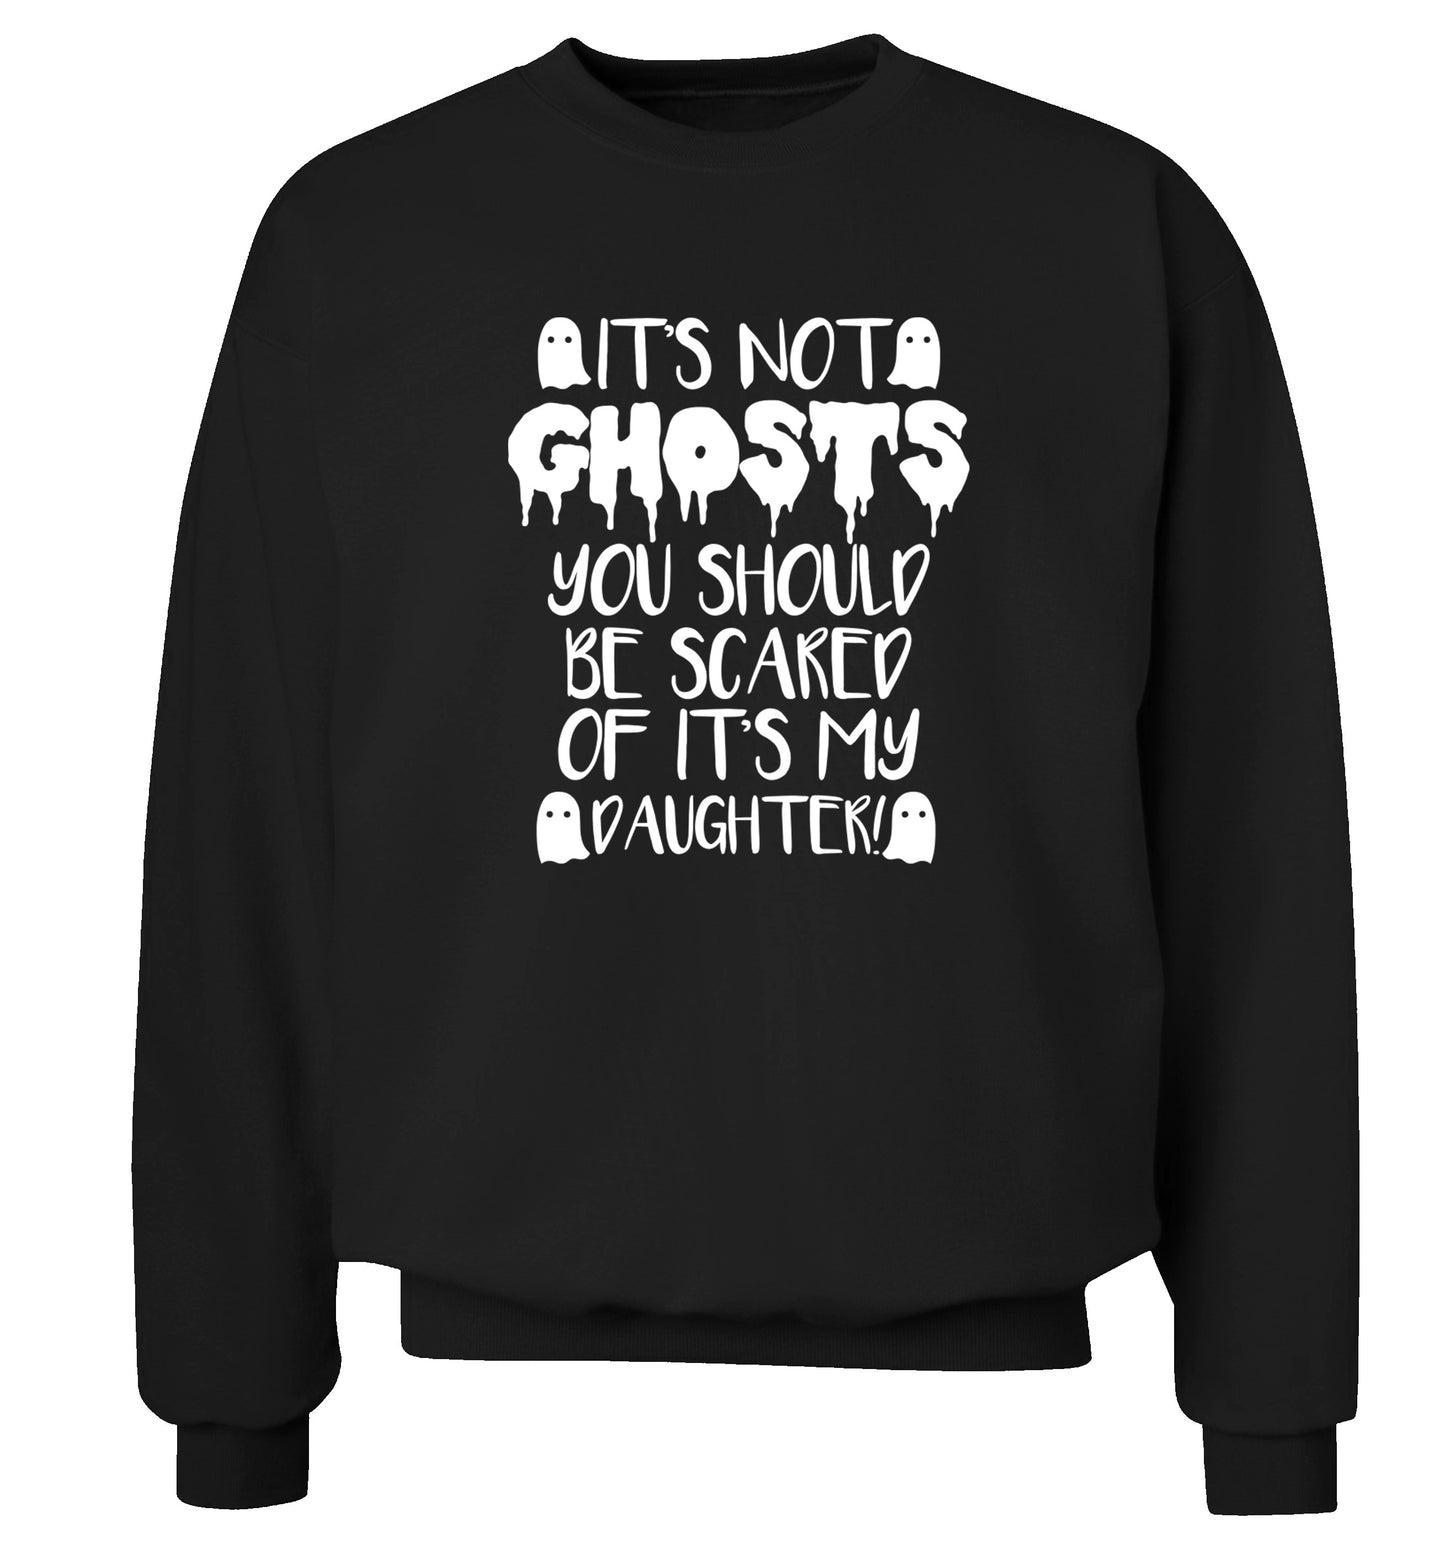 It's not ghosts you should be scared of it's my daughter! Adult's unisex black Sweater 2XL